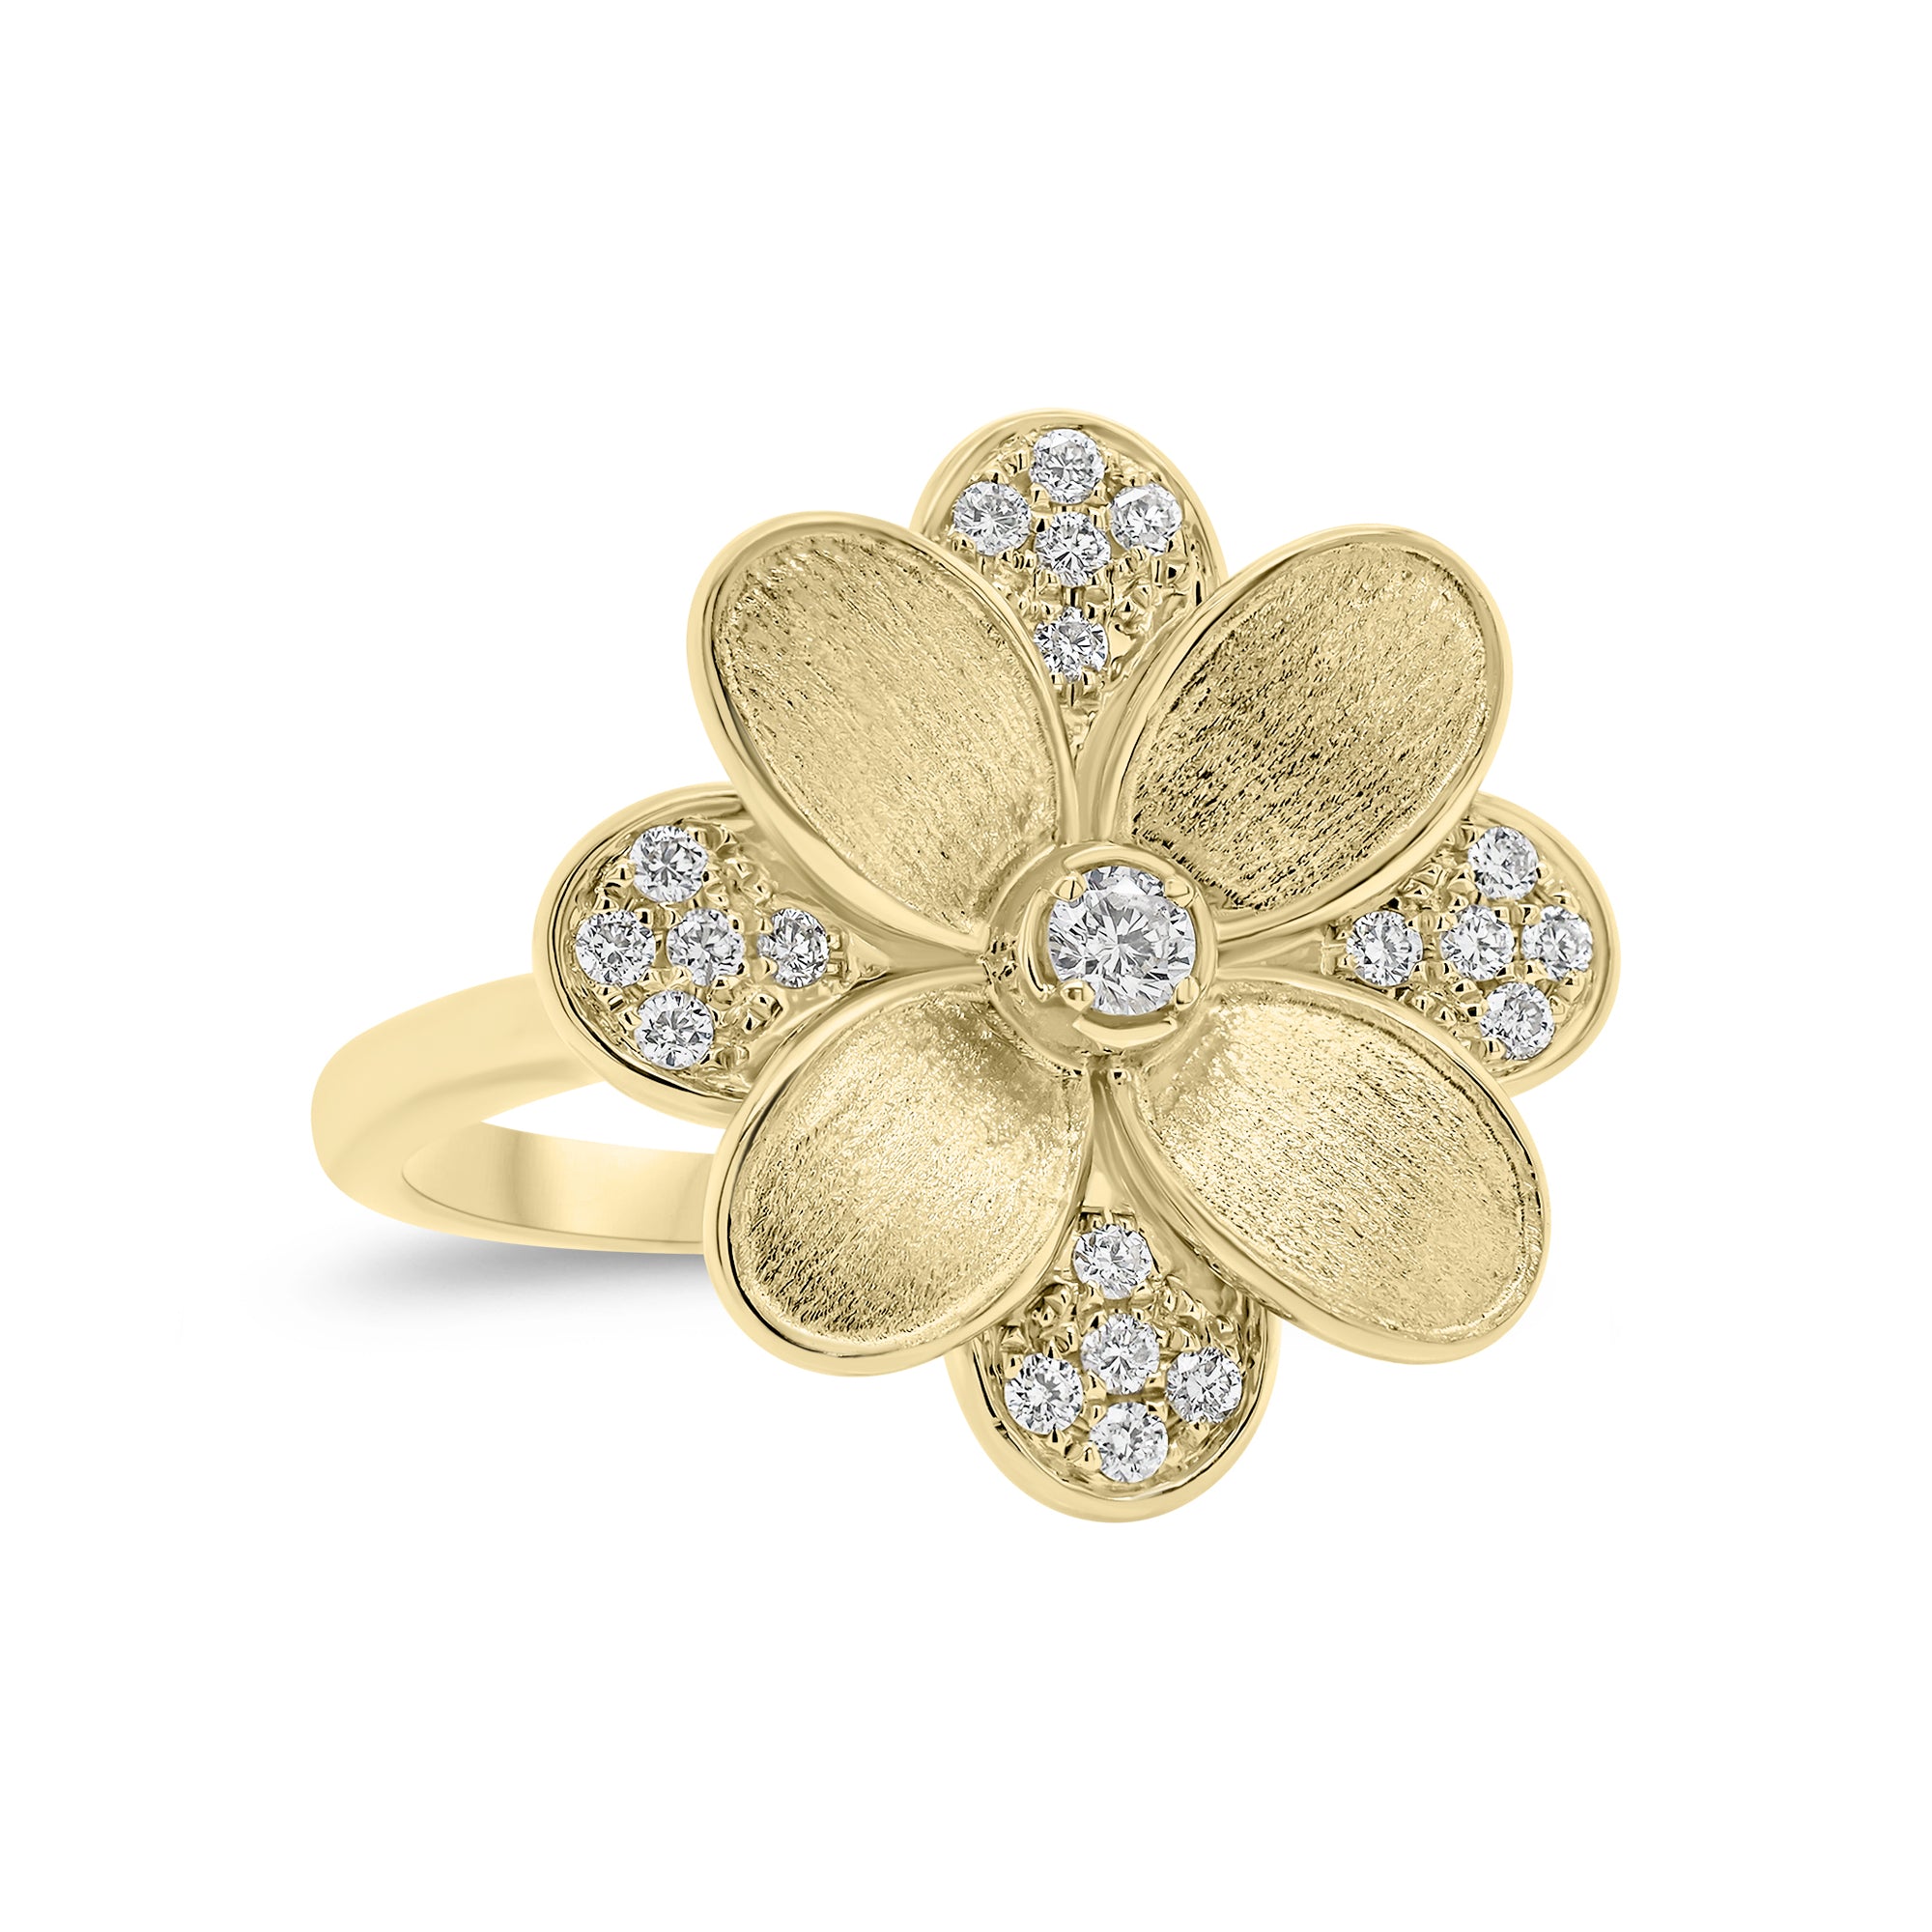 Diamond and Brushed Gold Flower Cocktail Ring - 18K gold weighing 6.79 grams  - 21 round diamonds weighing 0.24 carats